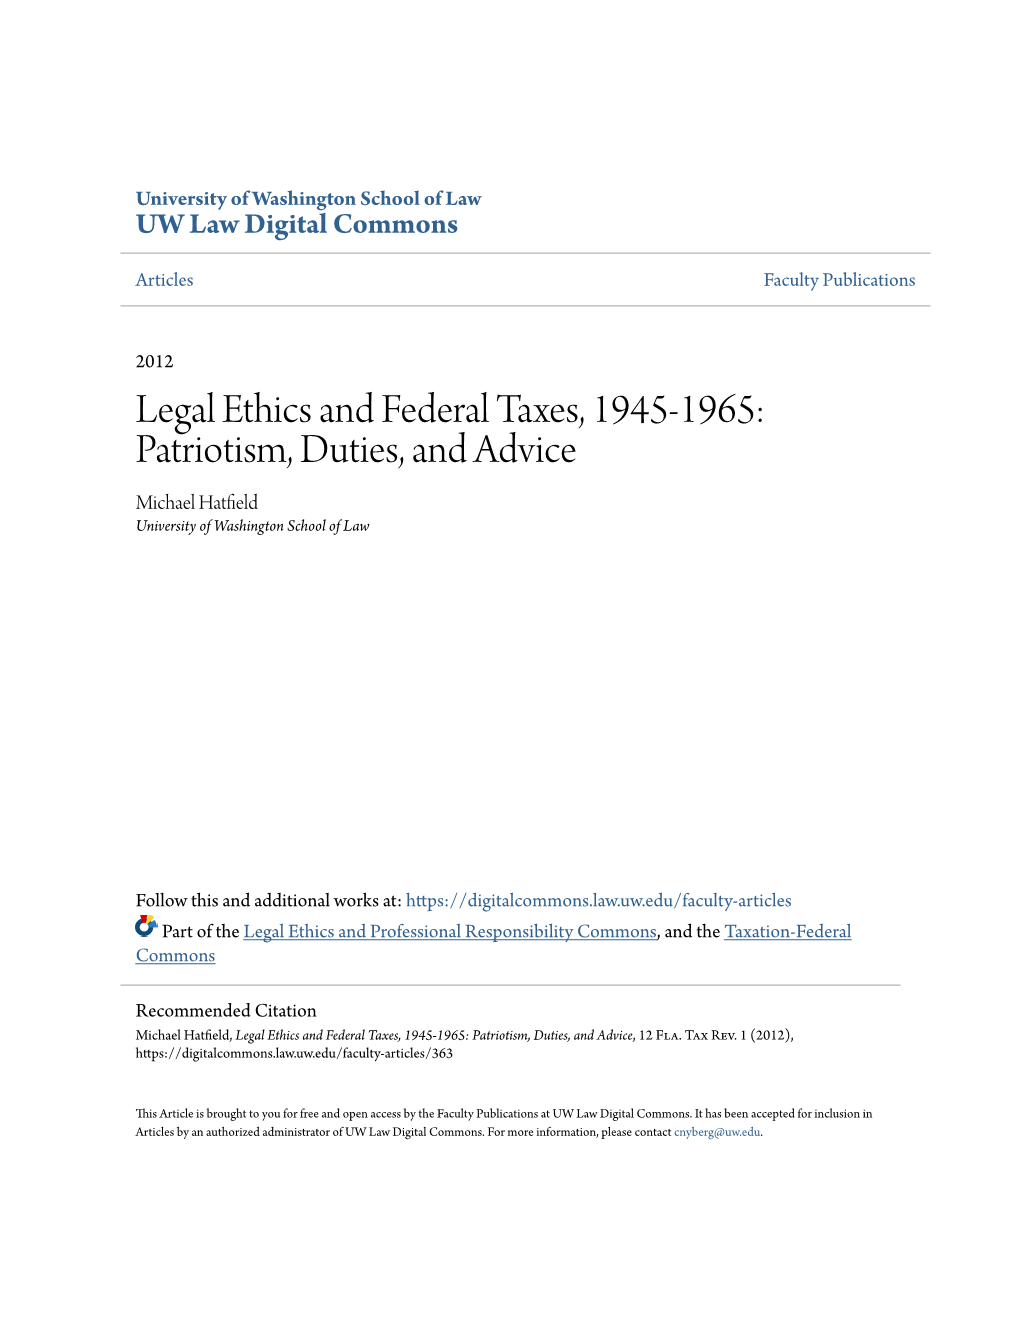 Legal Ethics and Federal Taxes, 1945-1965: Patriotism, Duties, and Advice Michael Hatfield University of Washington School of Law